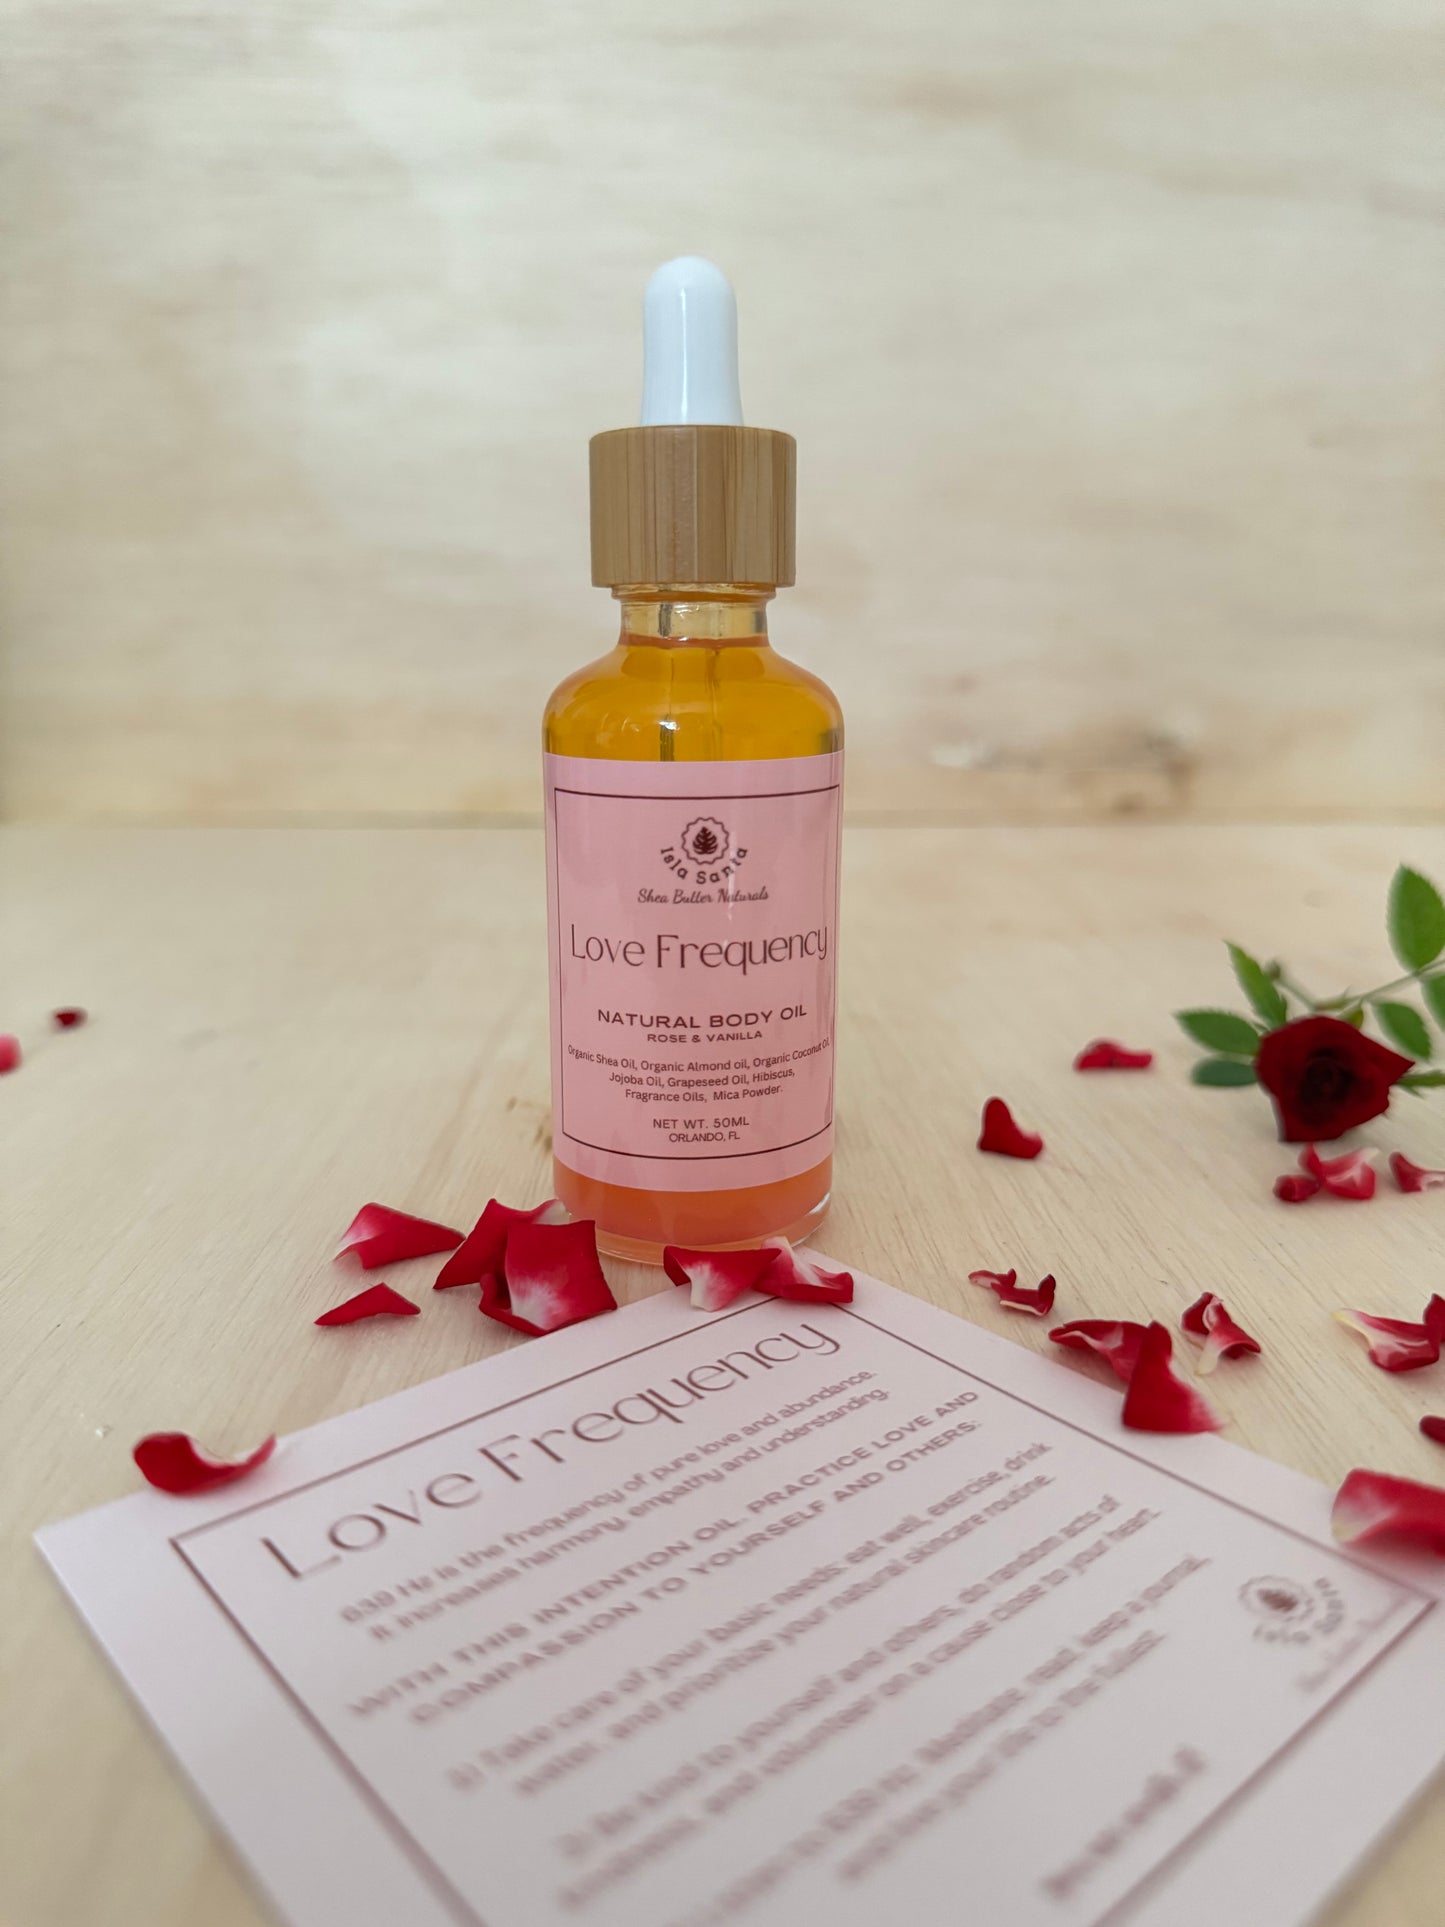 Love Frequency Intention Body Oil